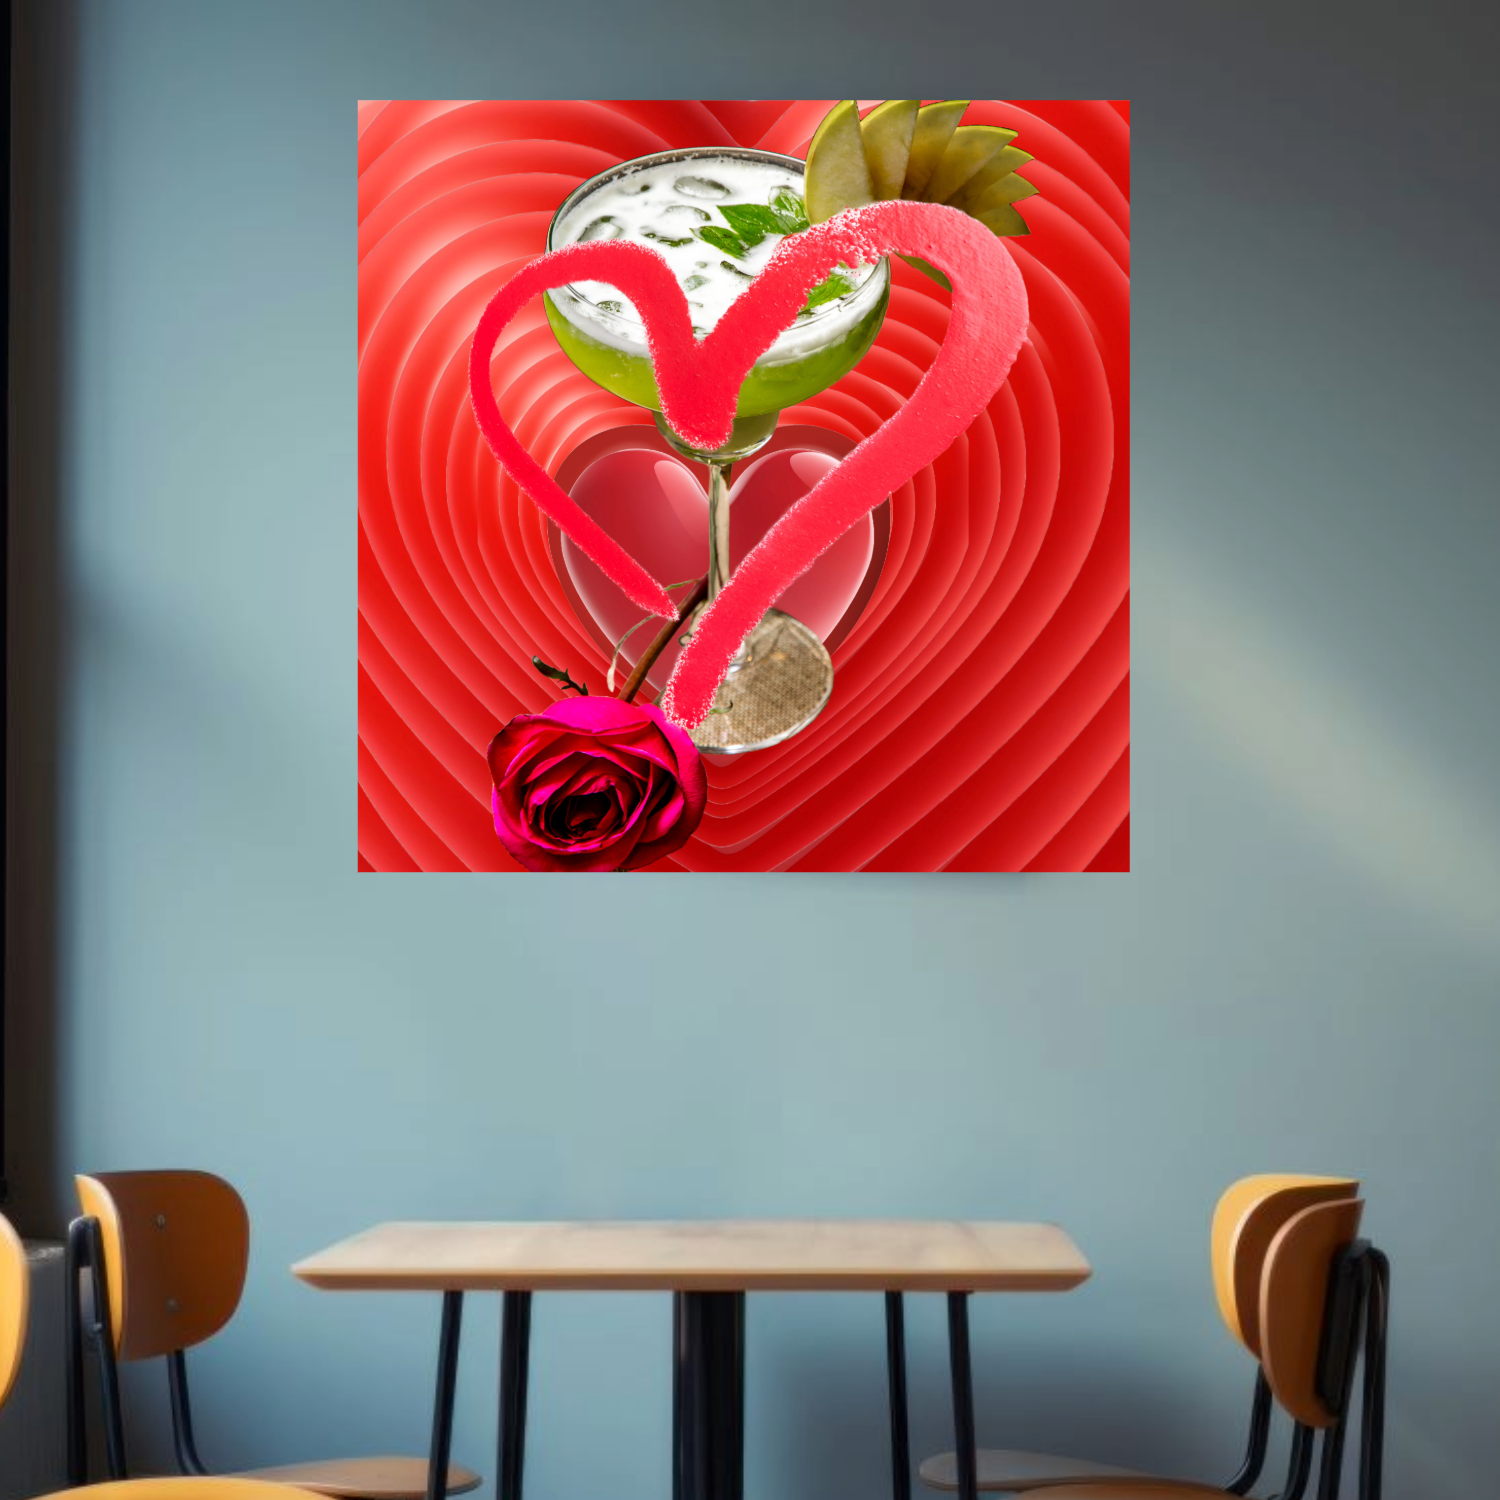 Wall Art LOVE MARGARITA Canvas Print Painting Original Giclee 40X30 GW Nice Beauty Food, Wine & Drinks Design Fit Red Hot House Home Living Office Gift Ready to Hang